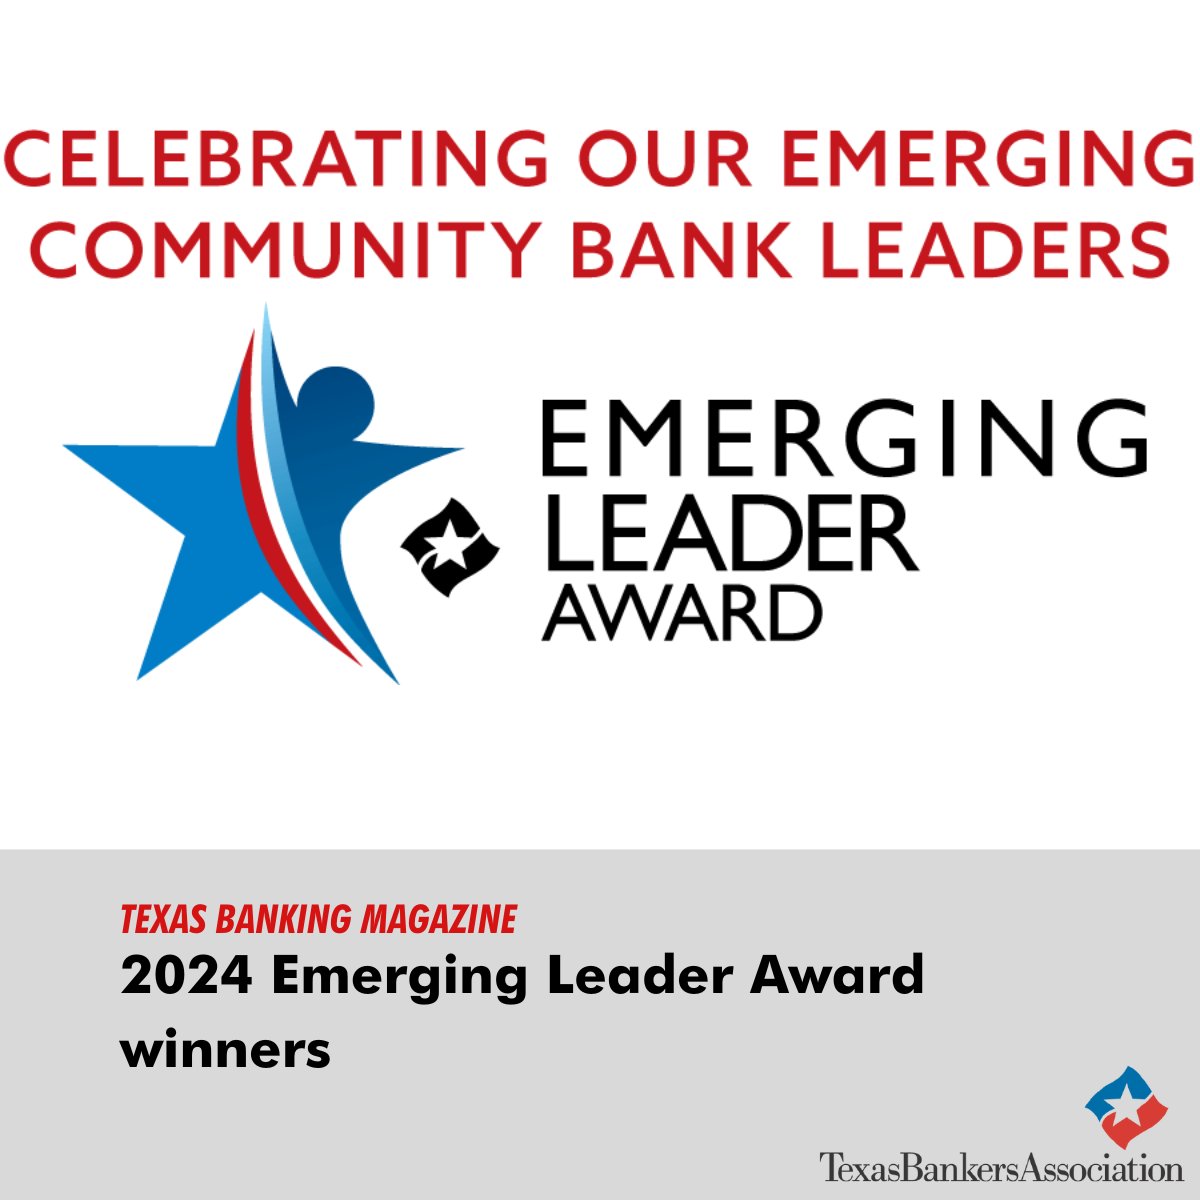 Ten remarkable bankers recognized as Emerging Leaders! The ten honorees were recognized by the Texas Bankers Foundation last week at the TBA Annual Convention. Read more about the Emerging Leaders: bit.ly/3whlW2K

#StrongBanks #StrongerCommunities